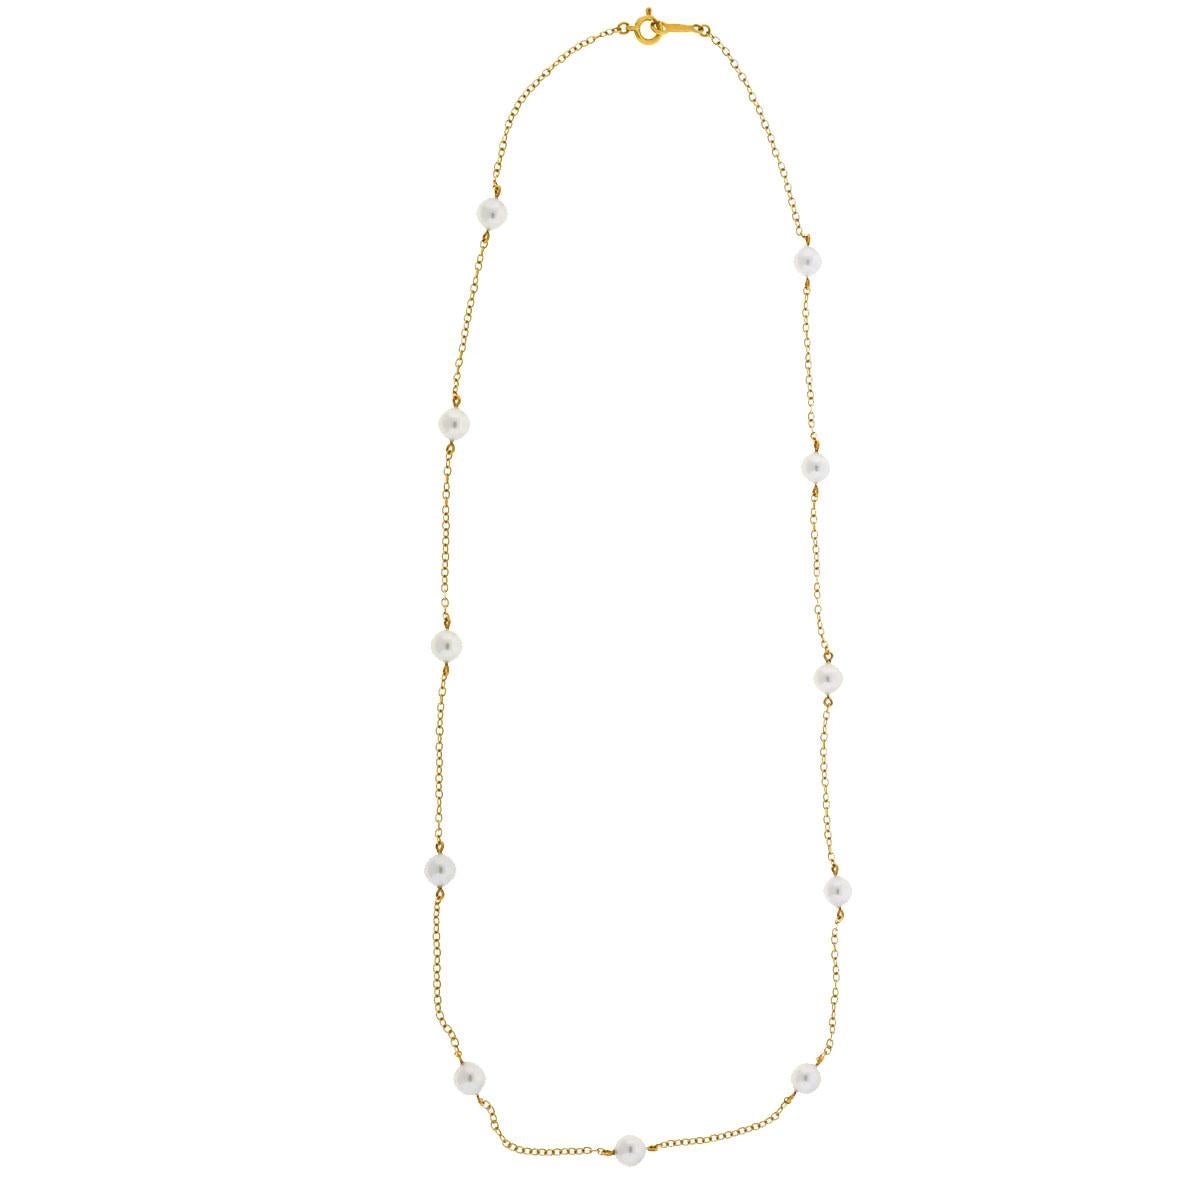 Company-MikiMoto
Style-White Akoyo Cultured Pearls Station Necklace
Metal-18k Yellow Gold
Chain Length-17